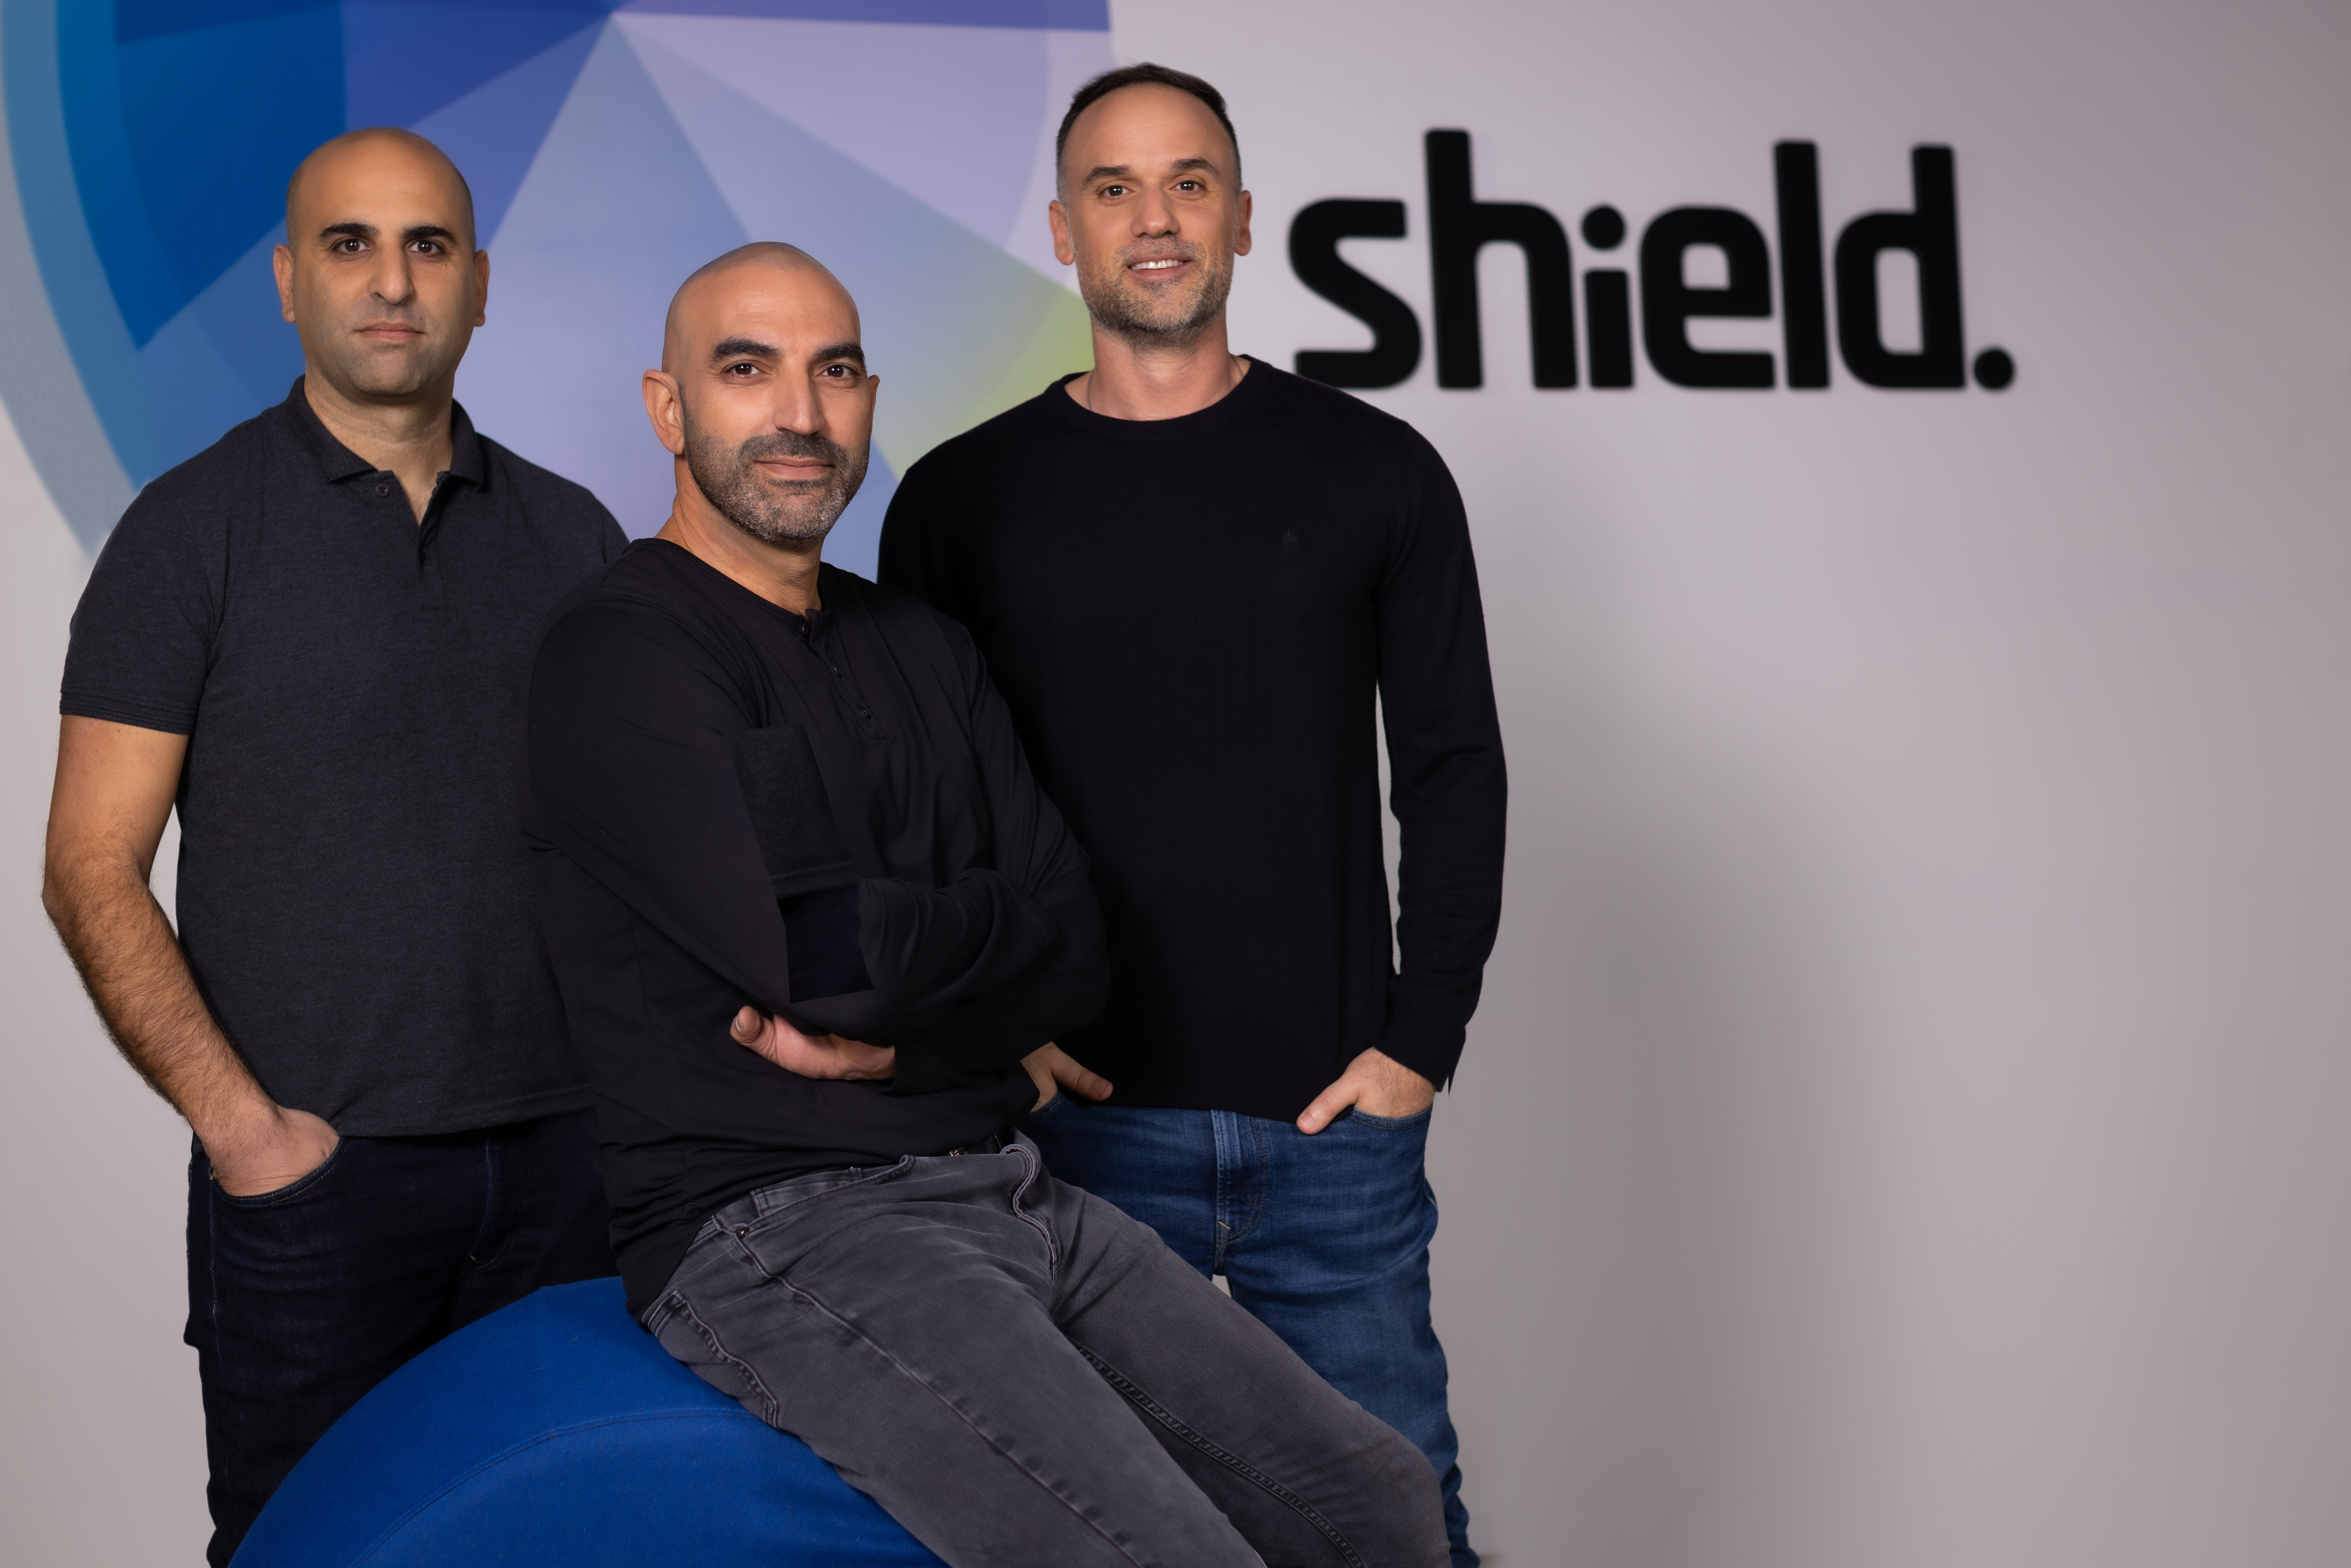 Riding Momentum from its Initial Funding Round Earlier this Year, Shield Announces $20 Million Series B Capital Raise thumbnail